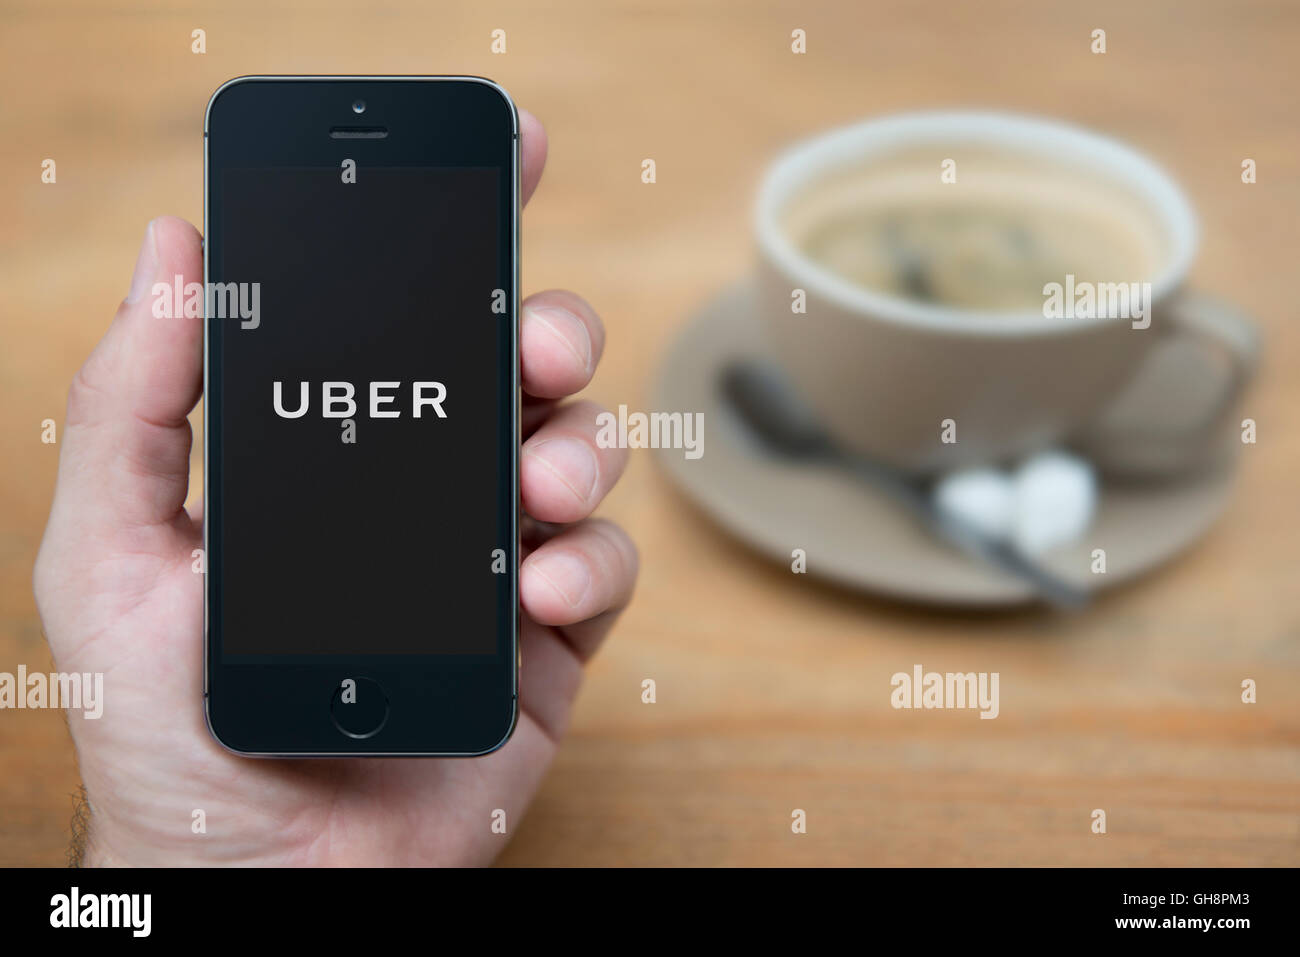 A man looks at his iPhone which displays the Uber logo, while sat with a cup of coffee (Editorial use only). Stock Photo